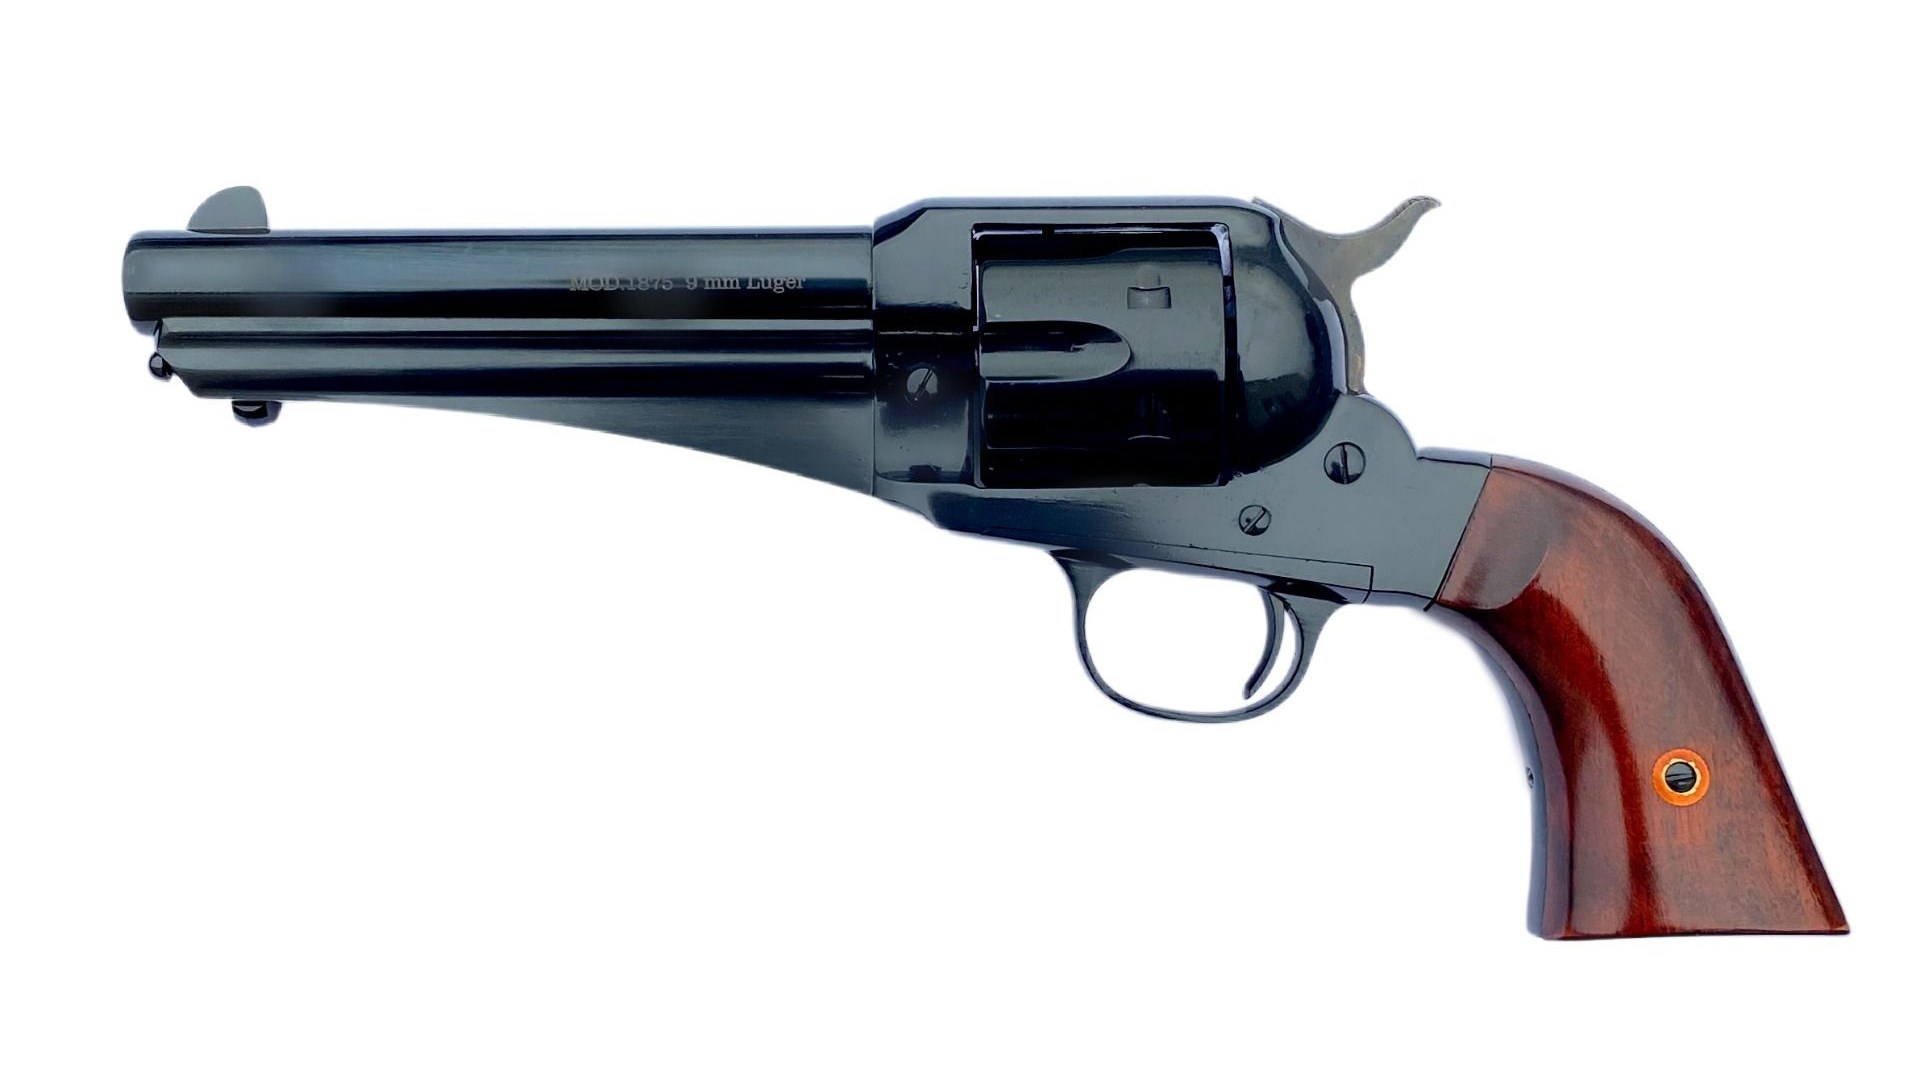 Taylor's & Company Outlaw Revolver's left side shown on white, with blackened metal and wood stocks.